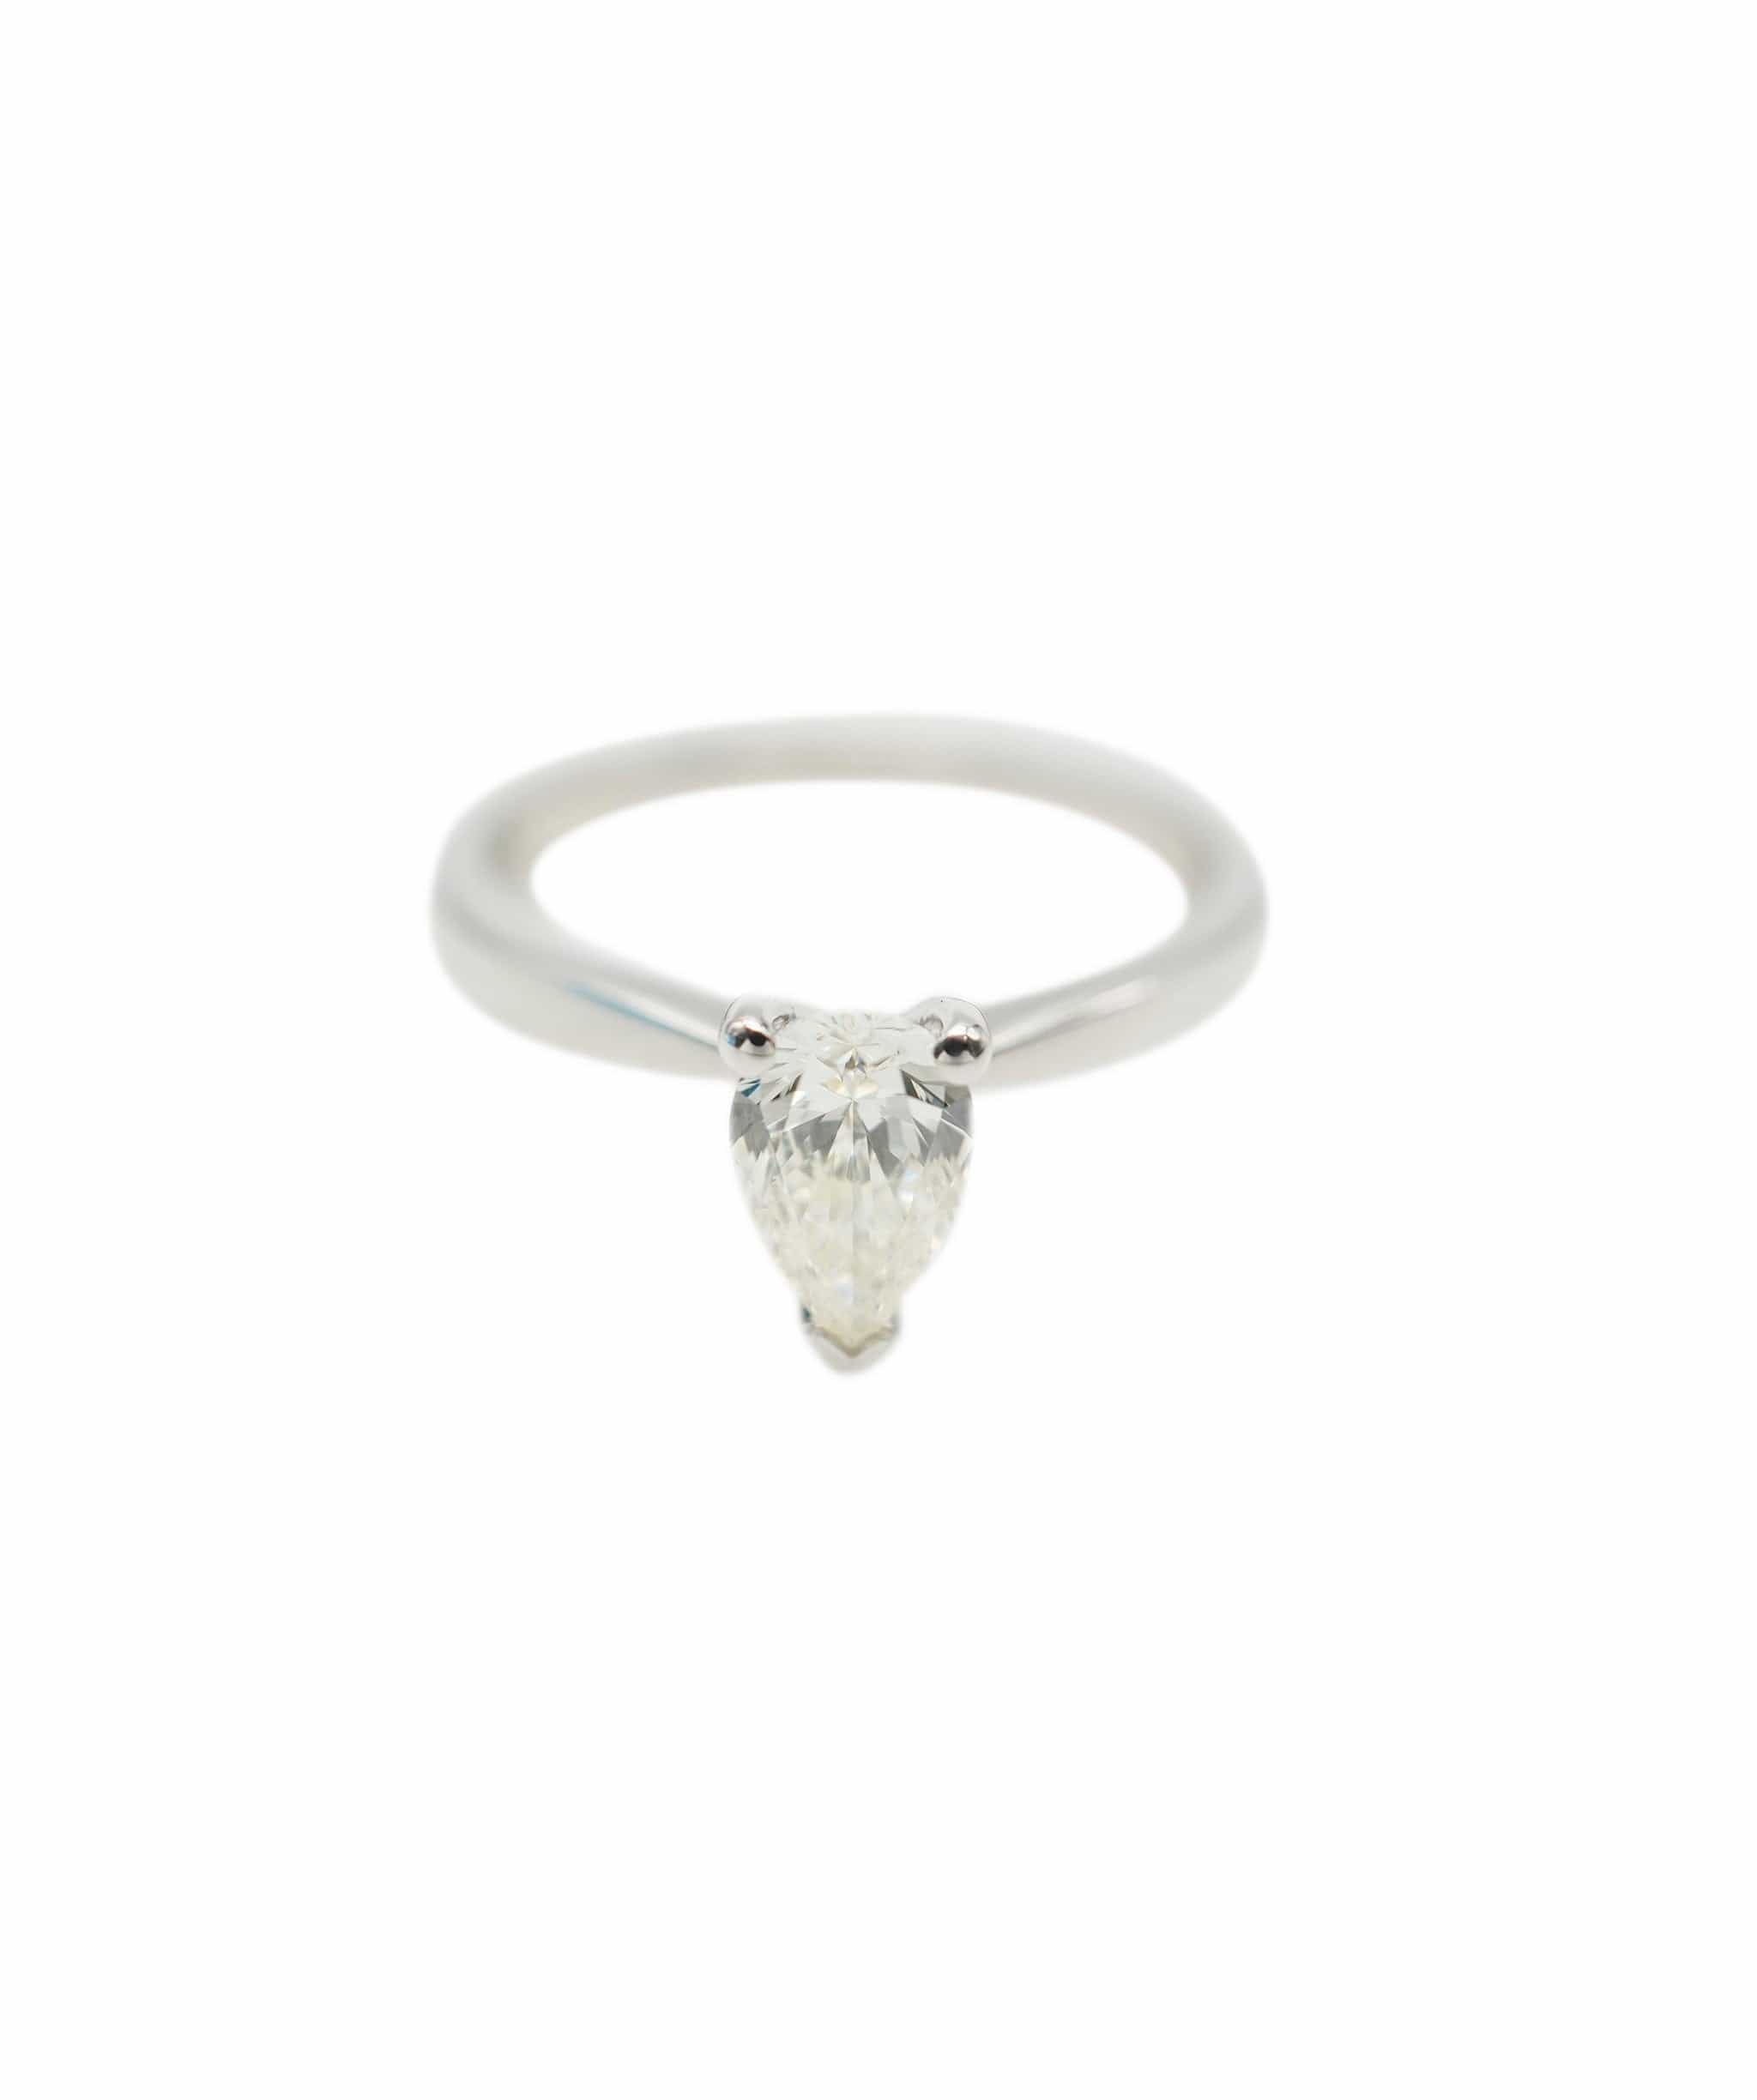 Luxury Promise Pear-shaped diamond,0.60 carat, white gold ring AHC1801